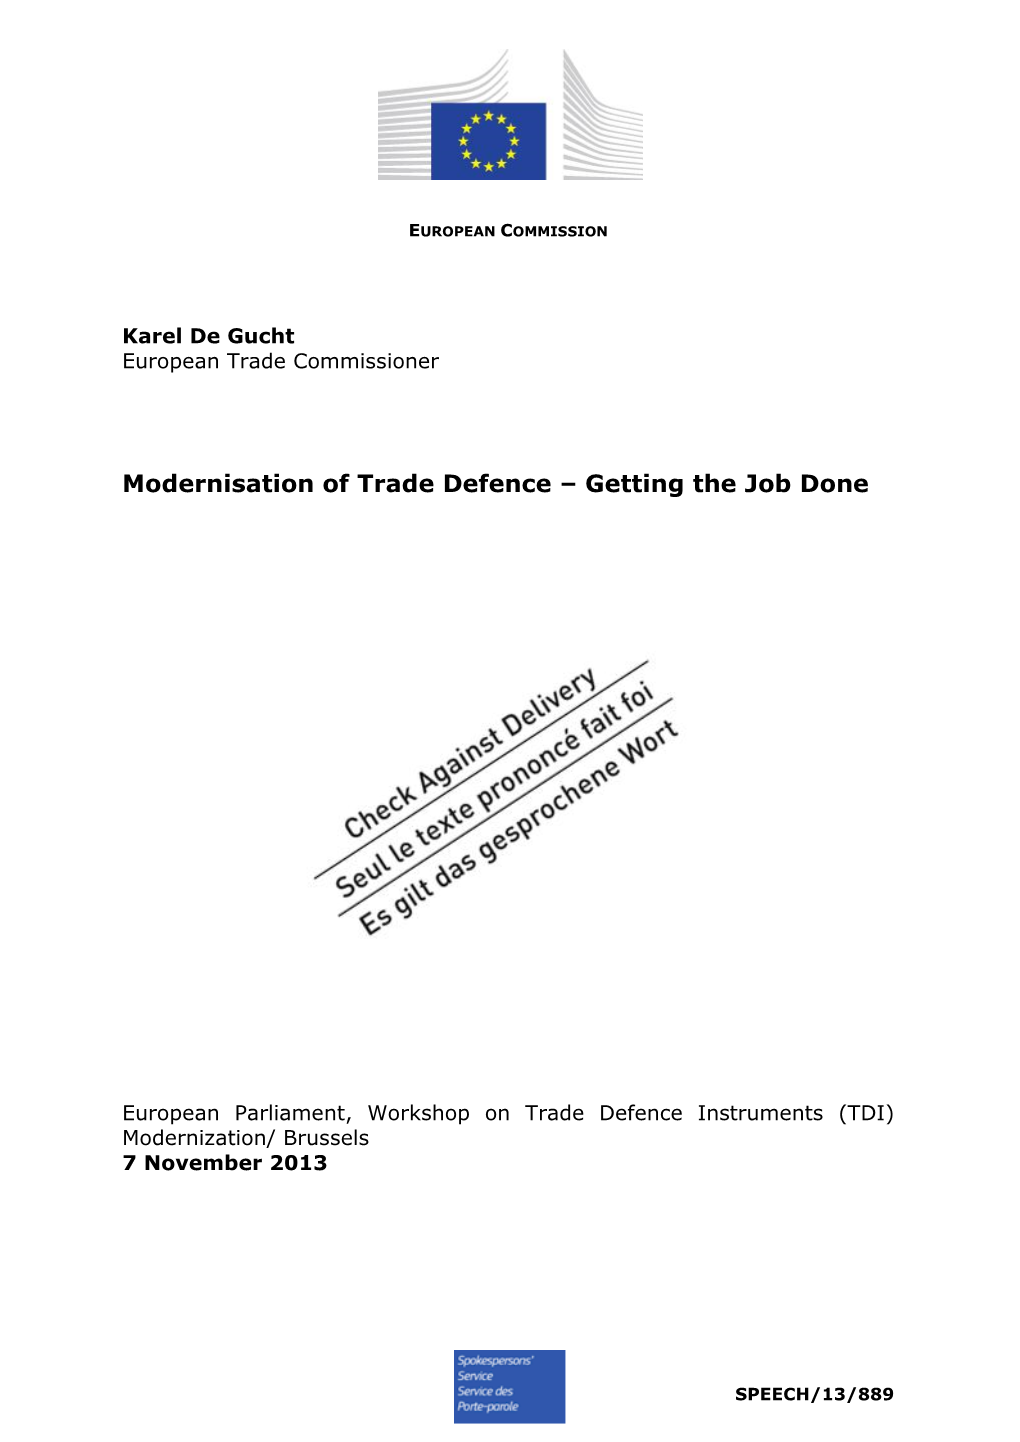 Modernisation of Trade Defence – Getting the Job Done